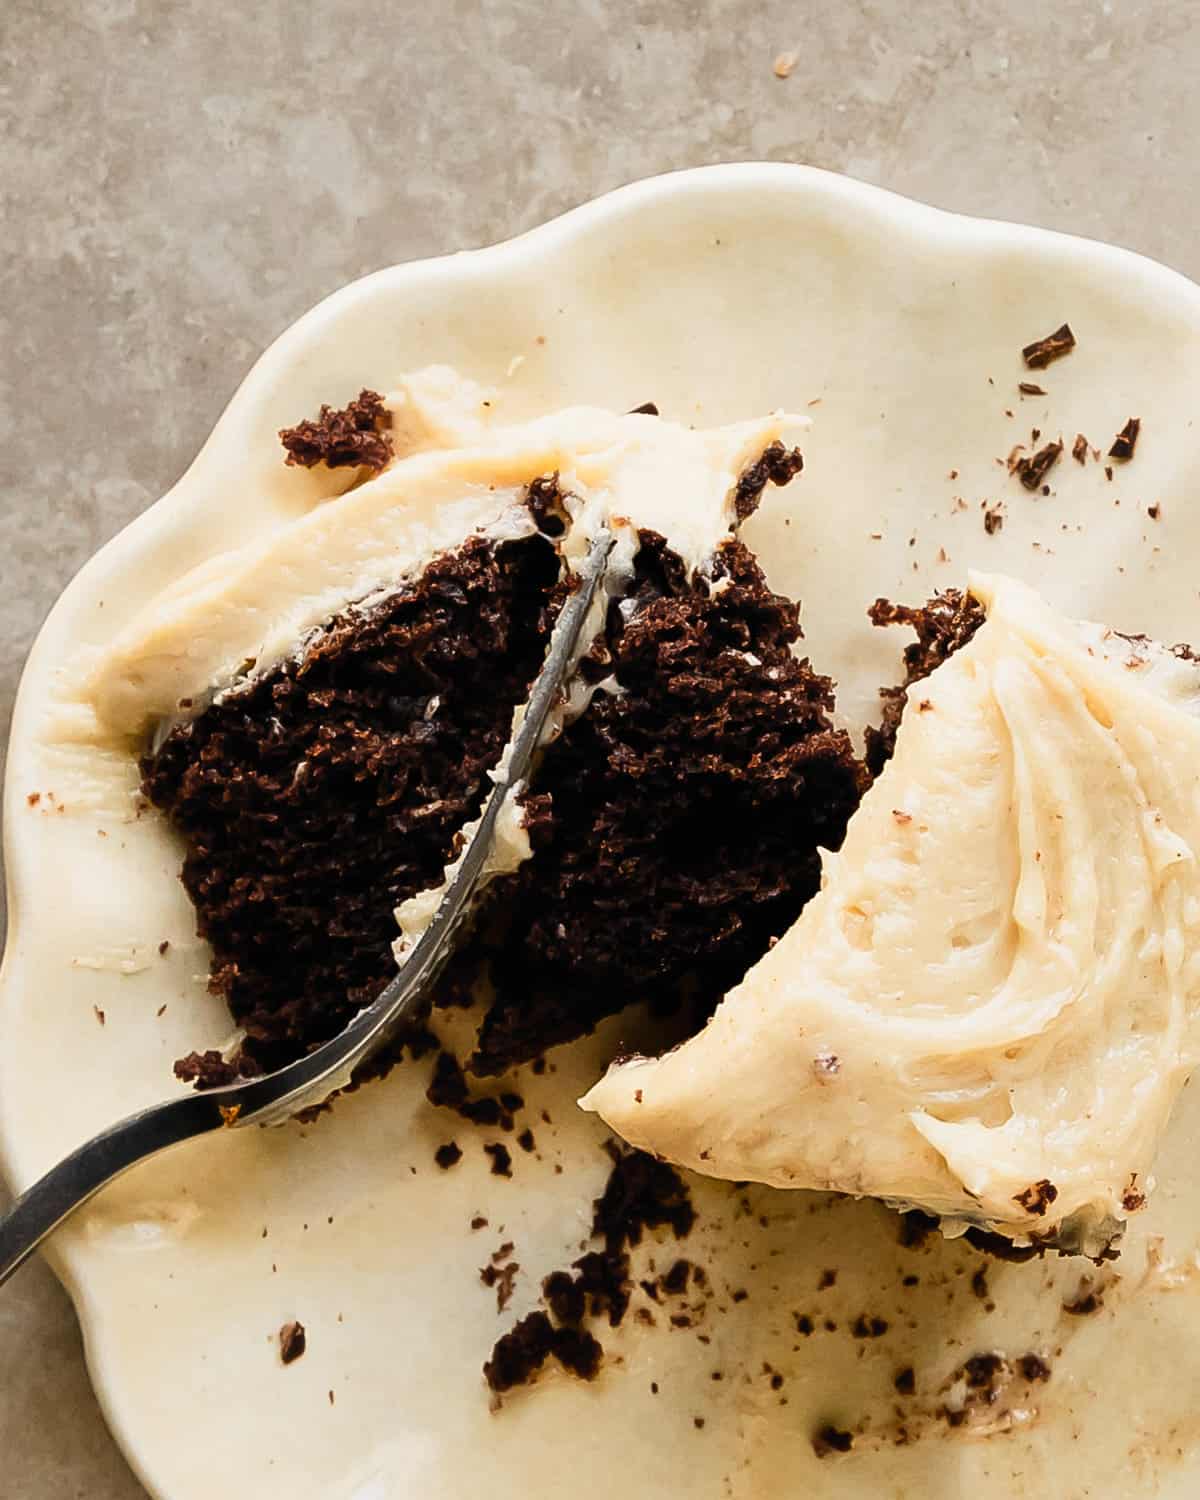 Chocolate banana cake is a moist and tender, from scratch chocolate cake filled with banana flavor. It’s topped with a rich and decadent peanut butter cream cheese frosting and shaved chocolate. This banana chocolate cake is not only quick and simple to make using two bowls and a whisk, it’s also the easy perfect cake for any occasion.